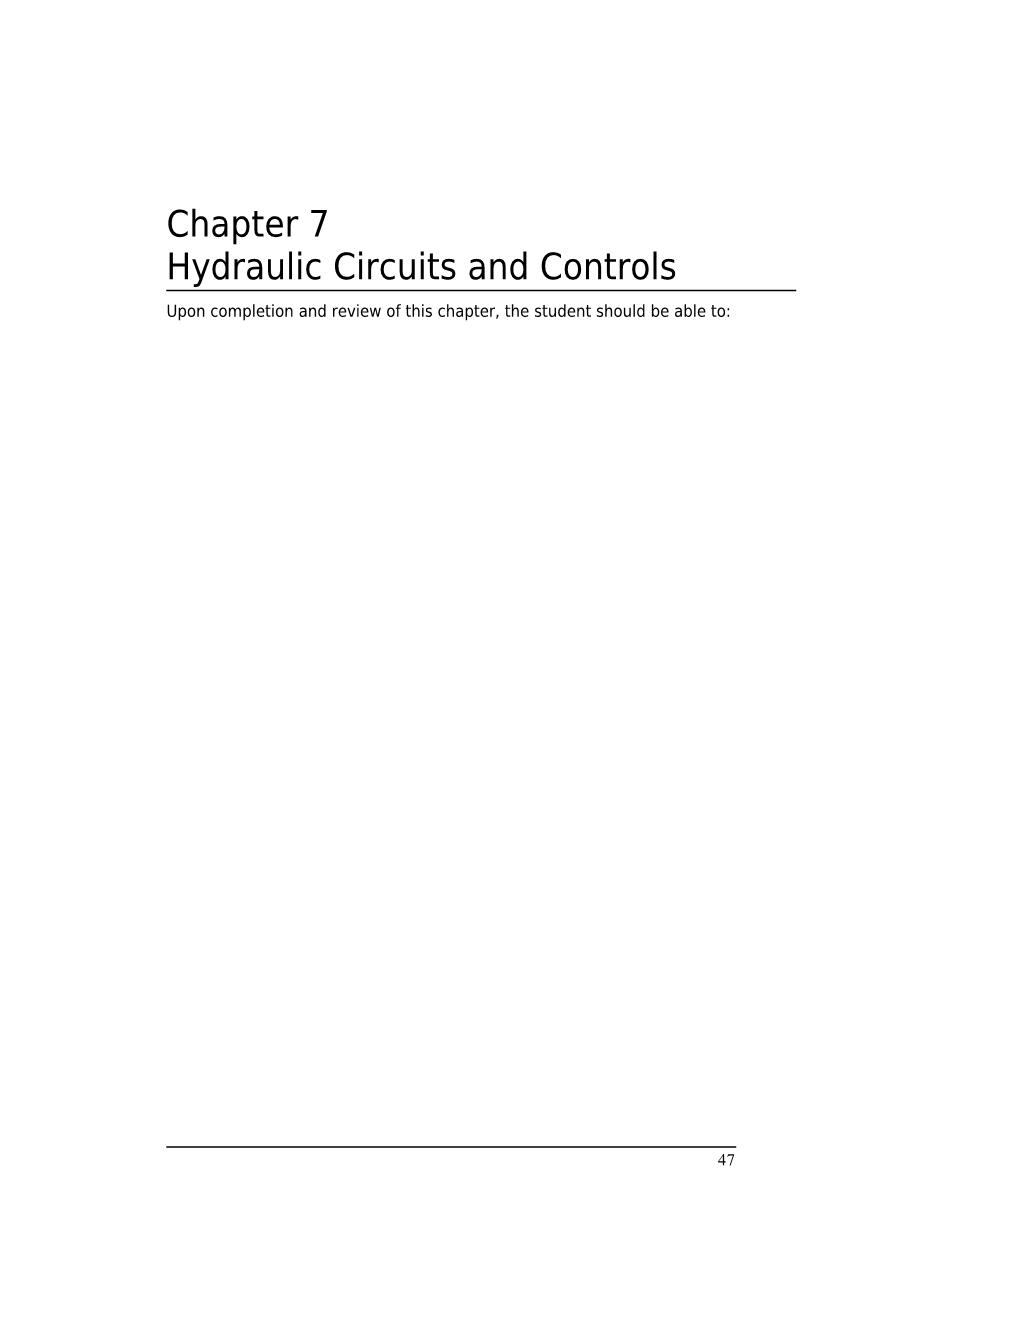 Chapter 7Hydraulic Circuits and Controls